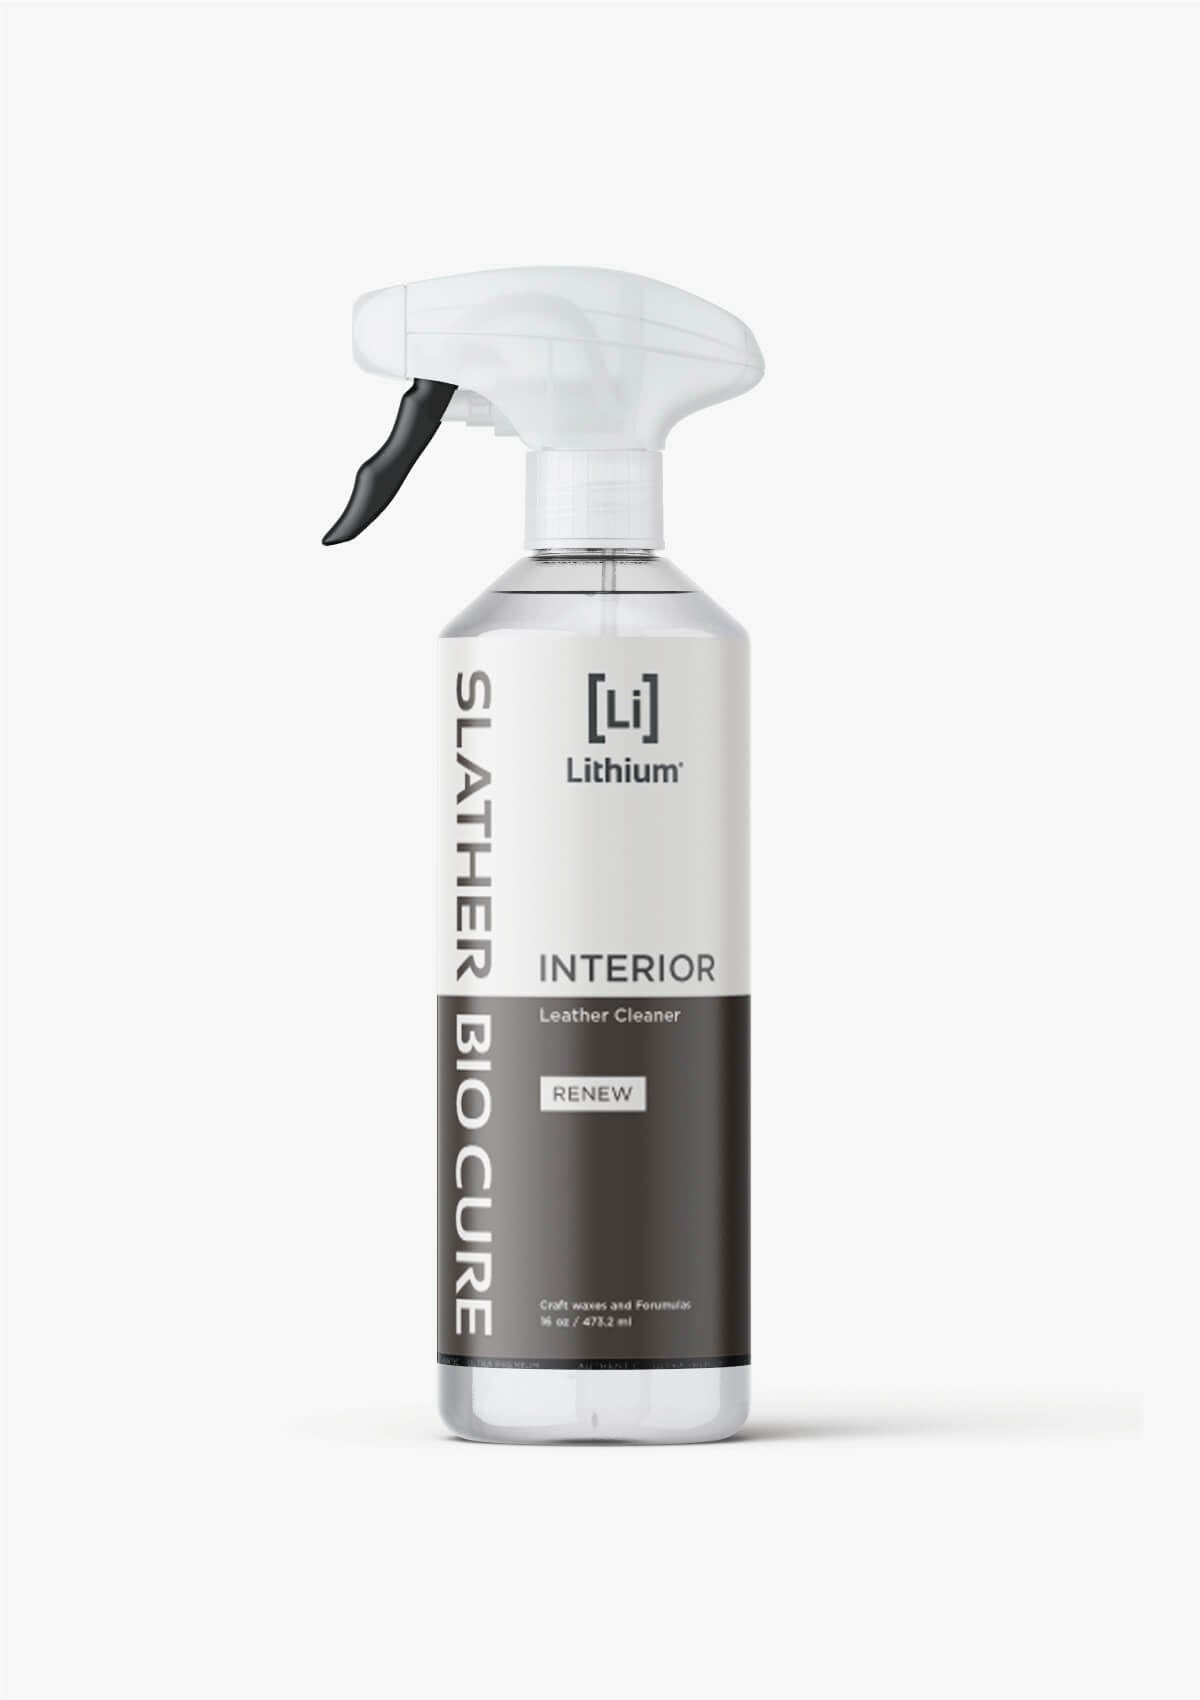 Bio-Cleanse Leather Cleaner